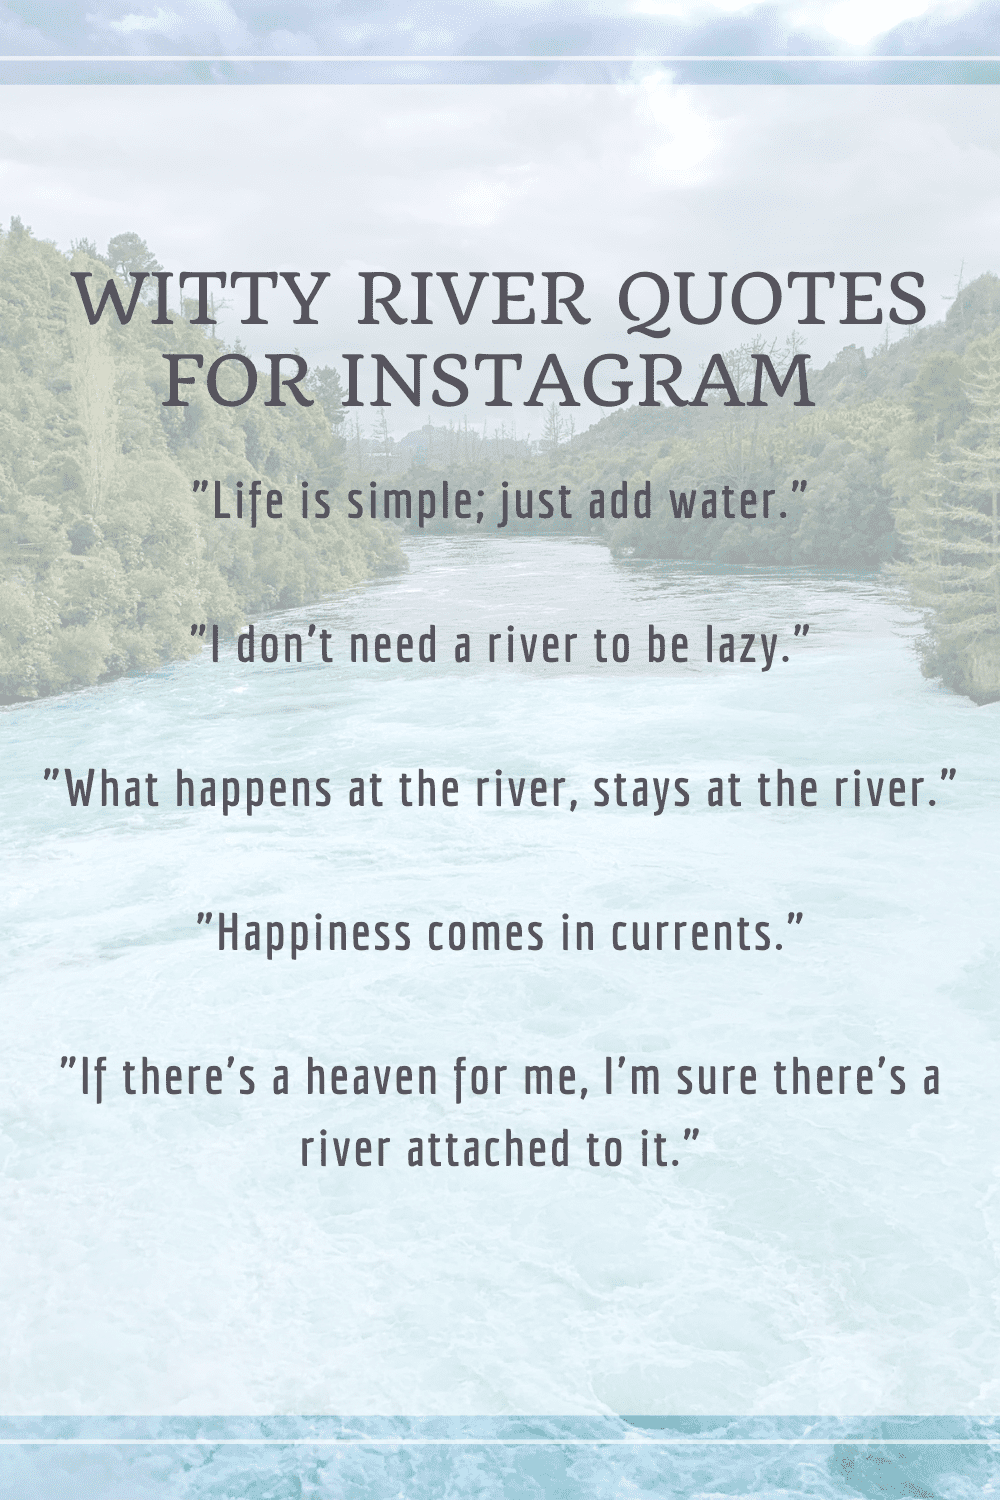 75+ Beautiful River Quotes & Captions (for Instagram & Inspiration)